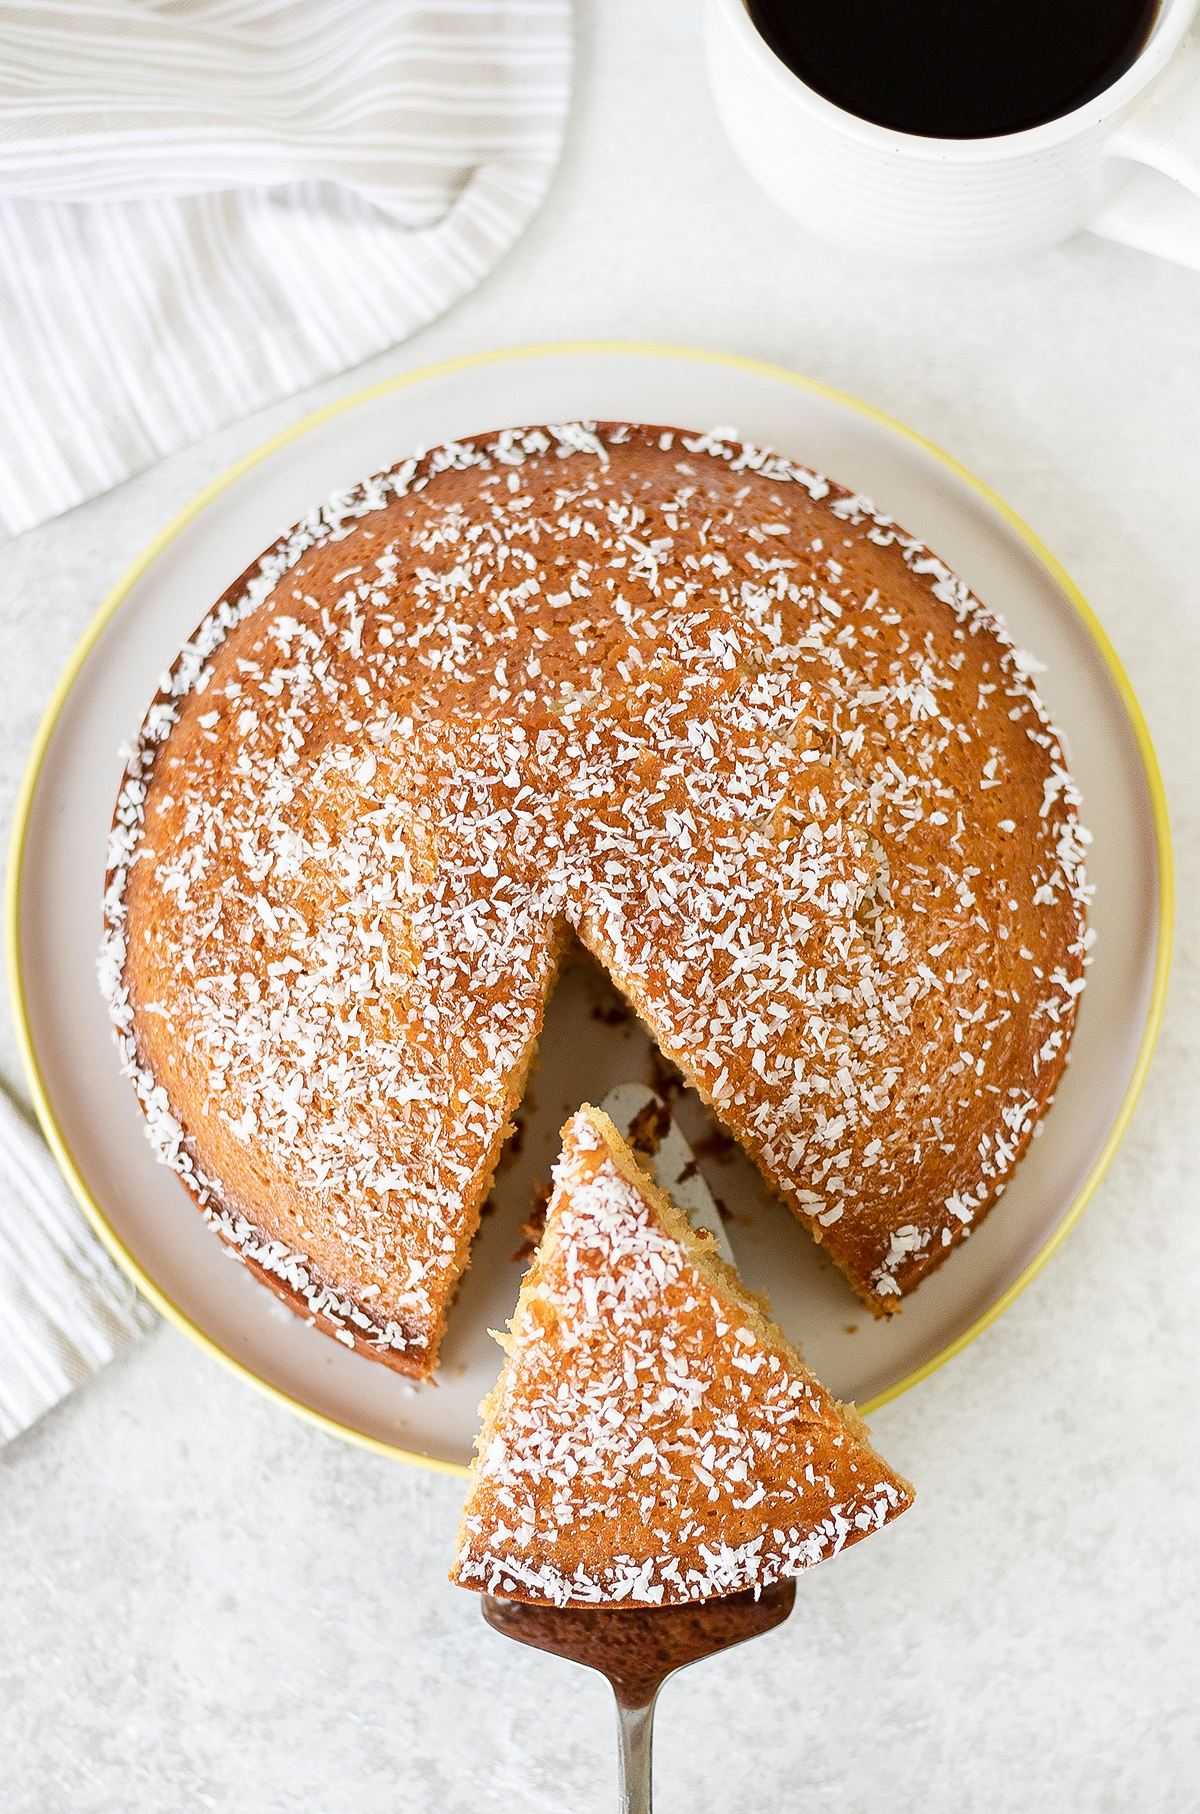 Golden Syrup Cake is a moist sponge cake made with golden syrup